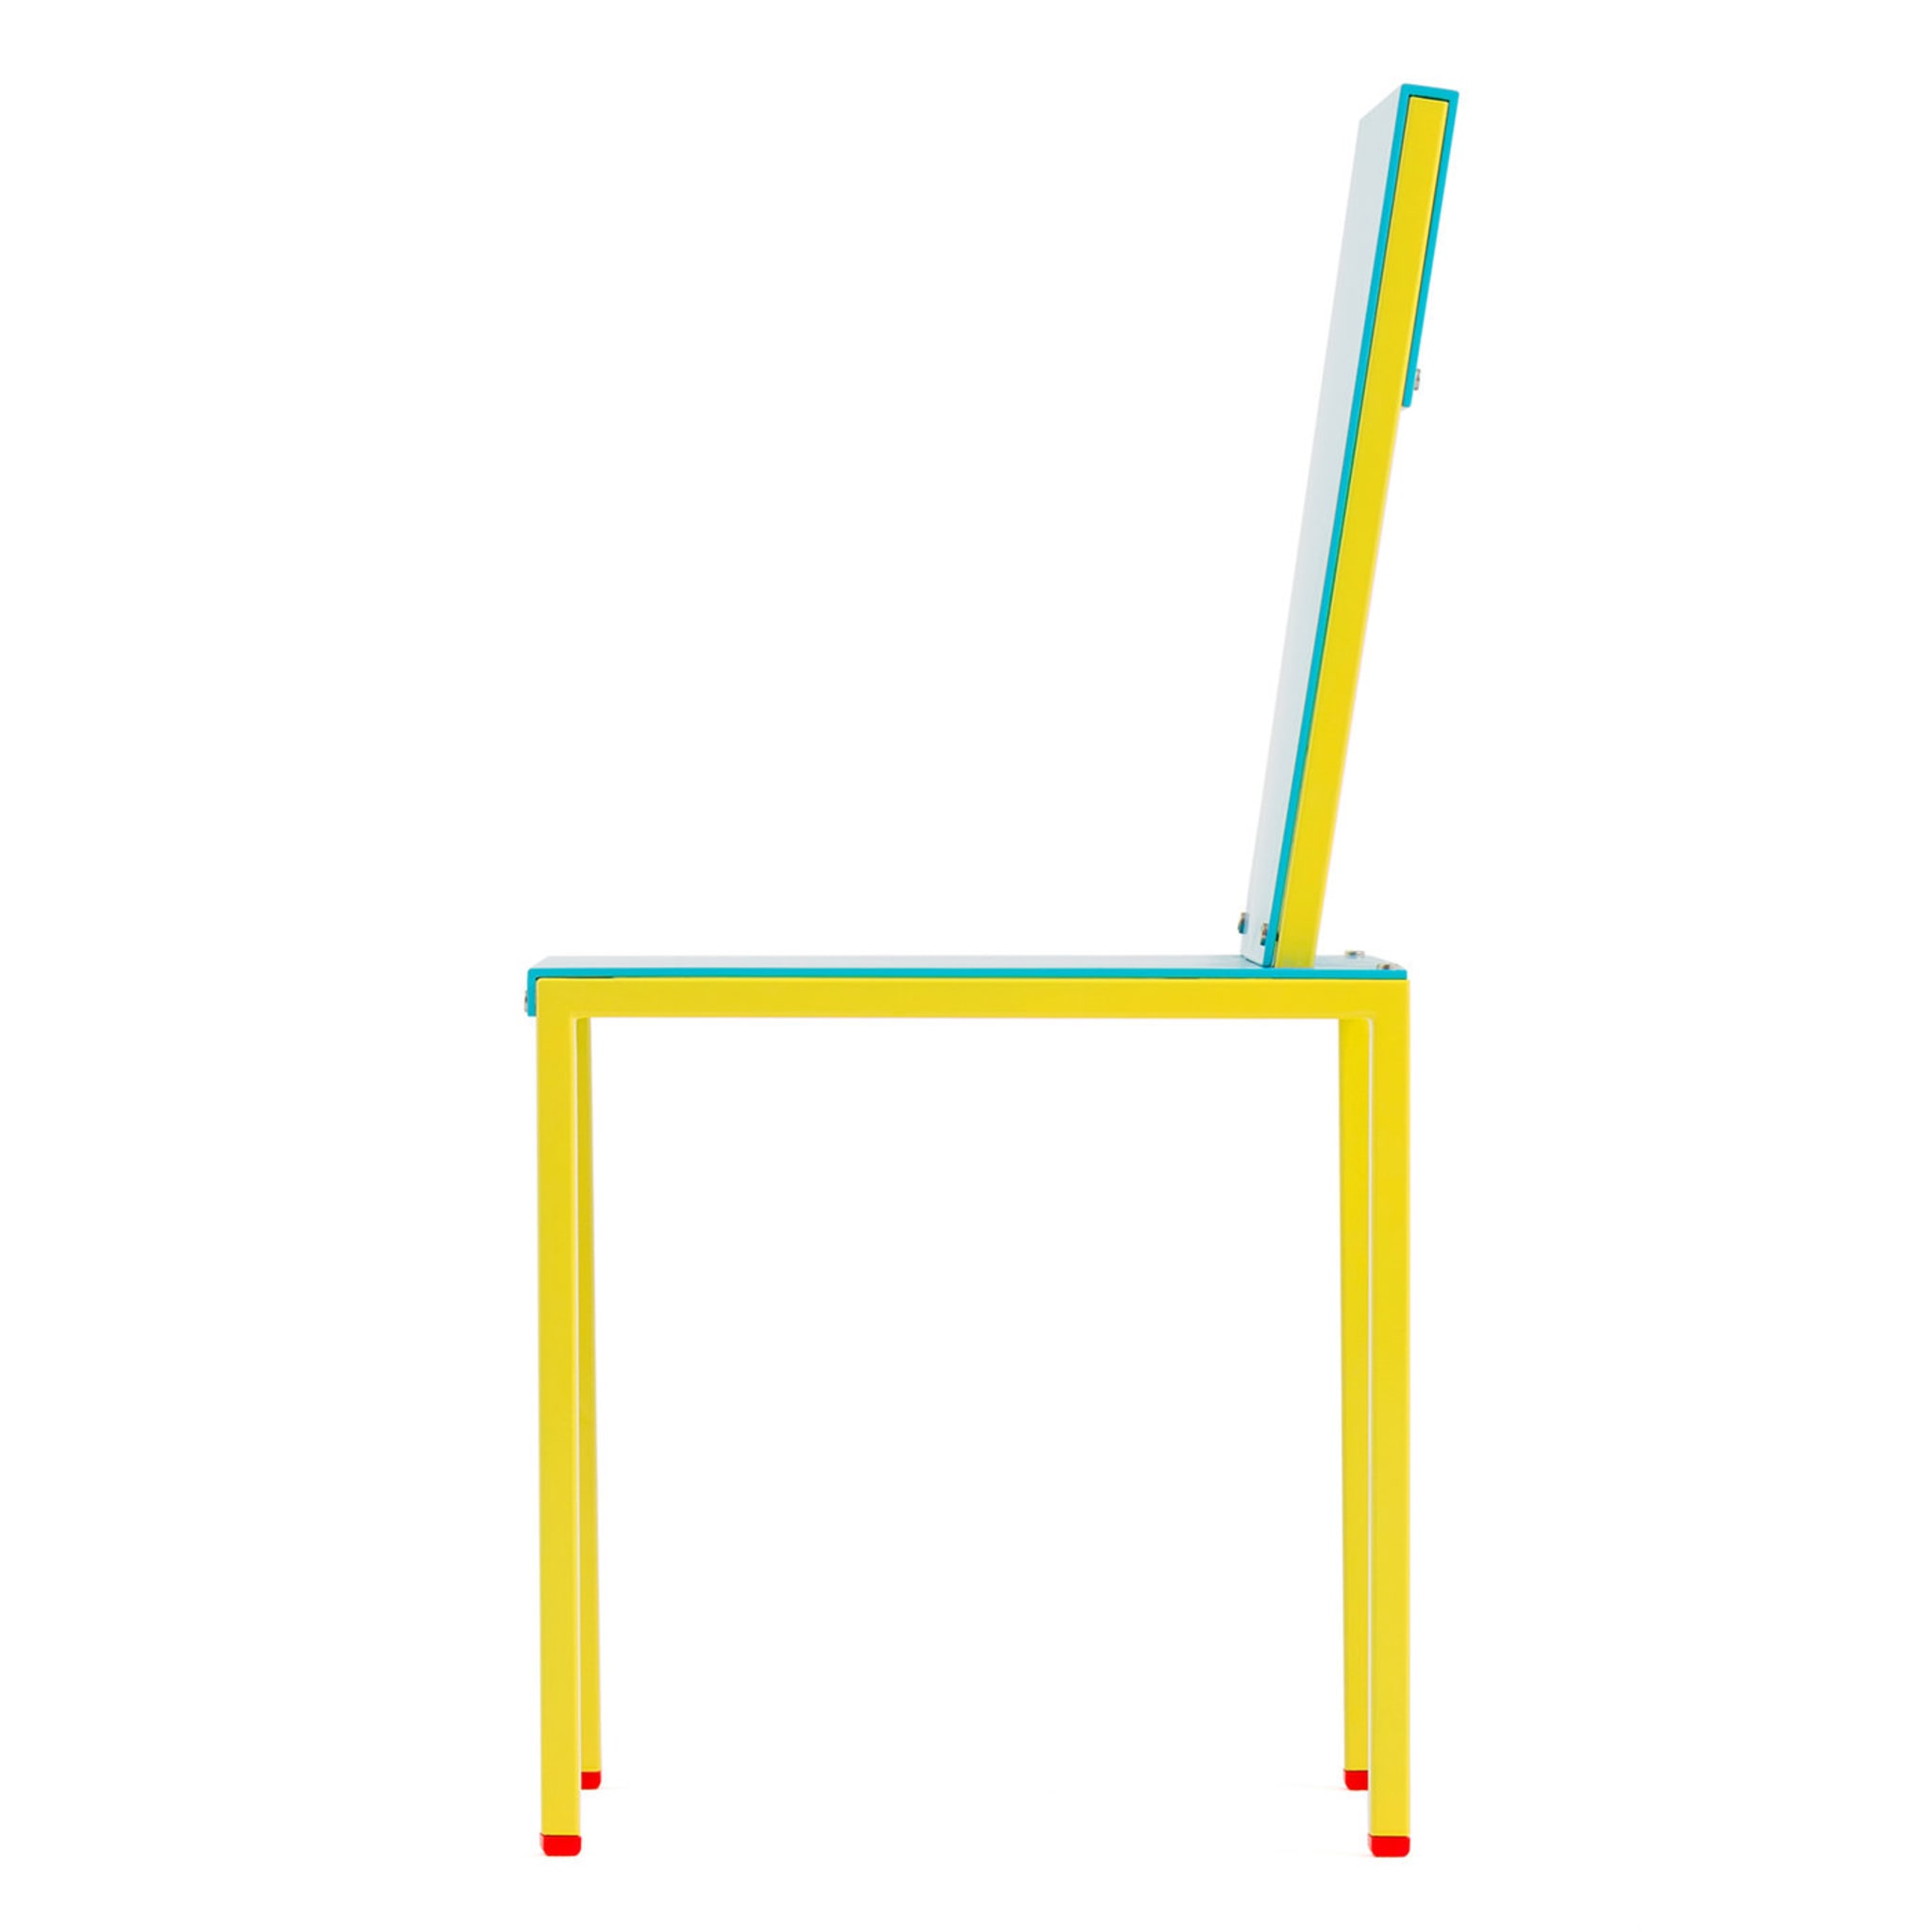 Primula Chair by George Sowden - Post Design - Alternative view 1